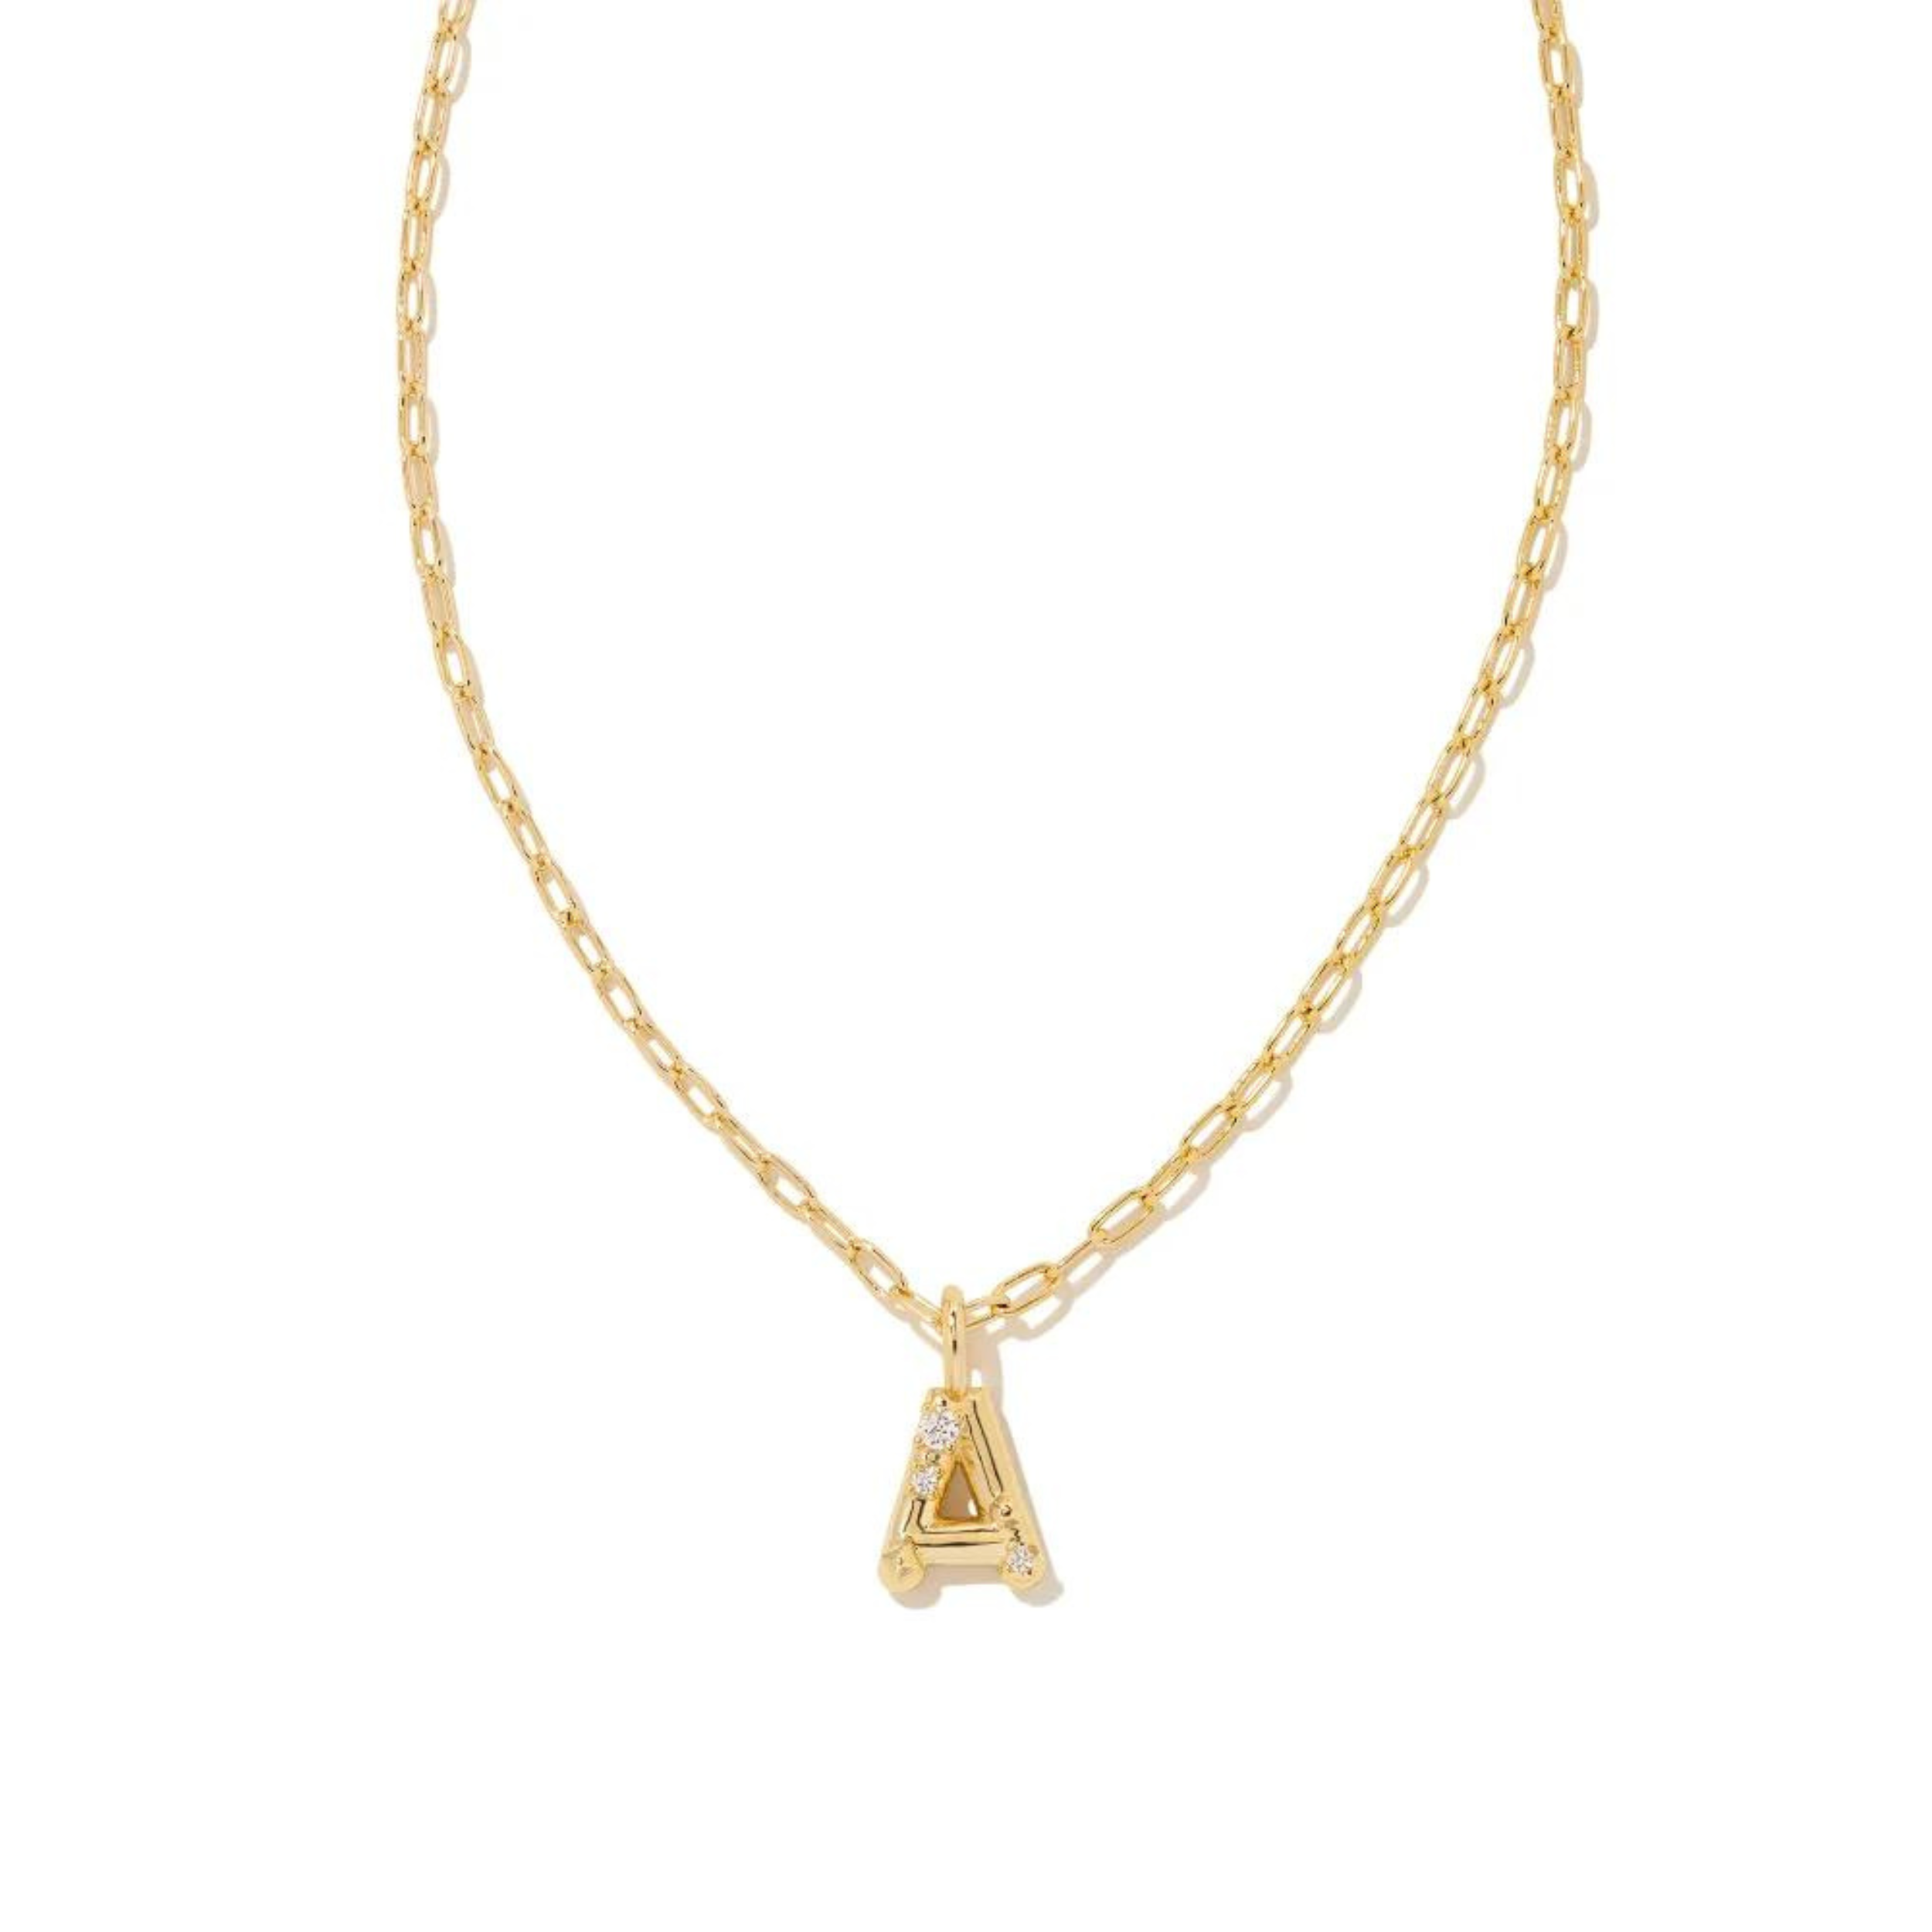 Kendra Scott Ada Two Toned Star Collar Necklace